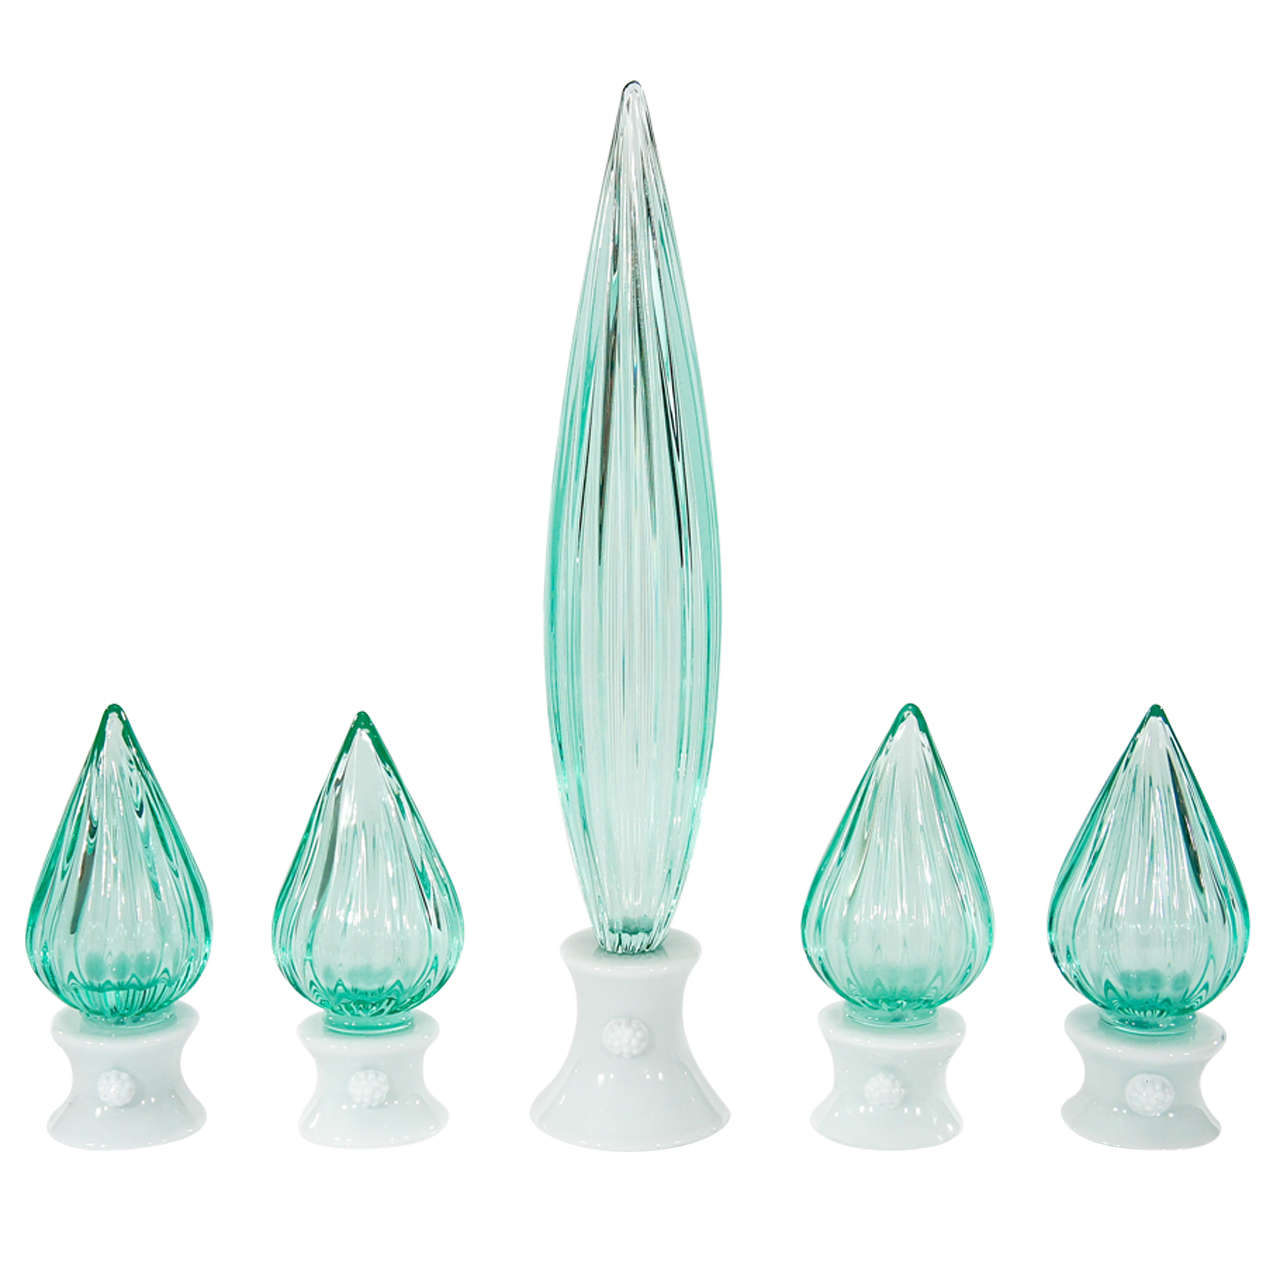 Set of 5 Venini Murano Hand Blown Teal Teardrop Sculptures/Garniture on Bases For Sale